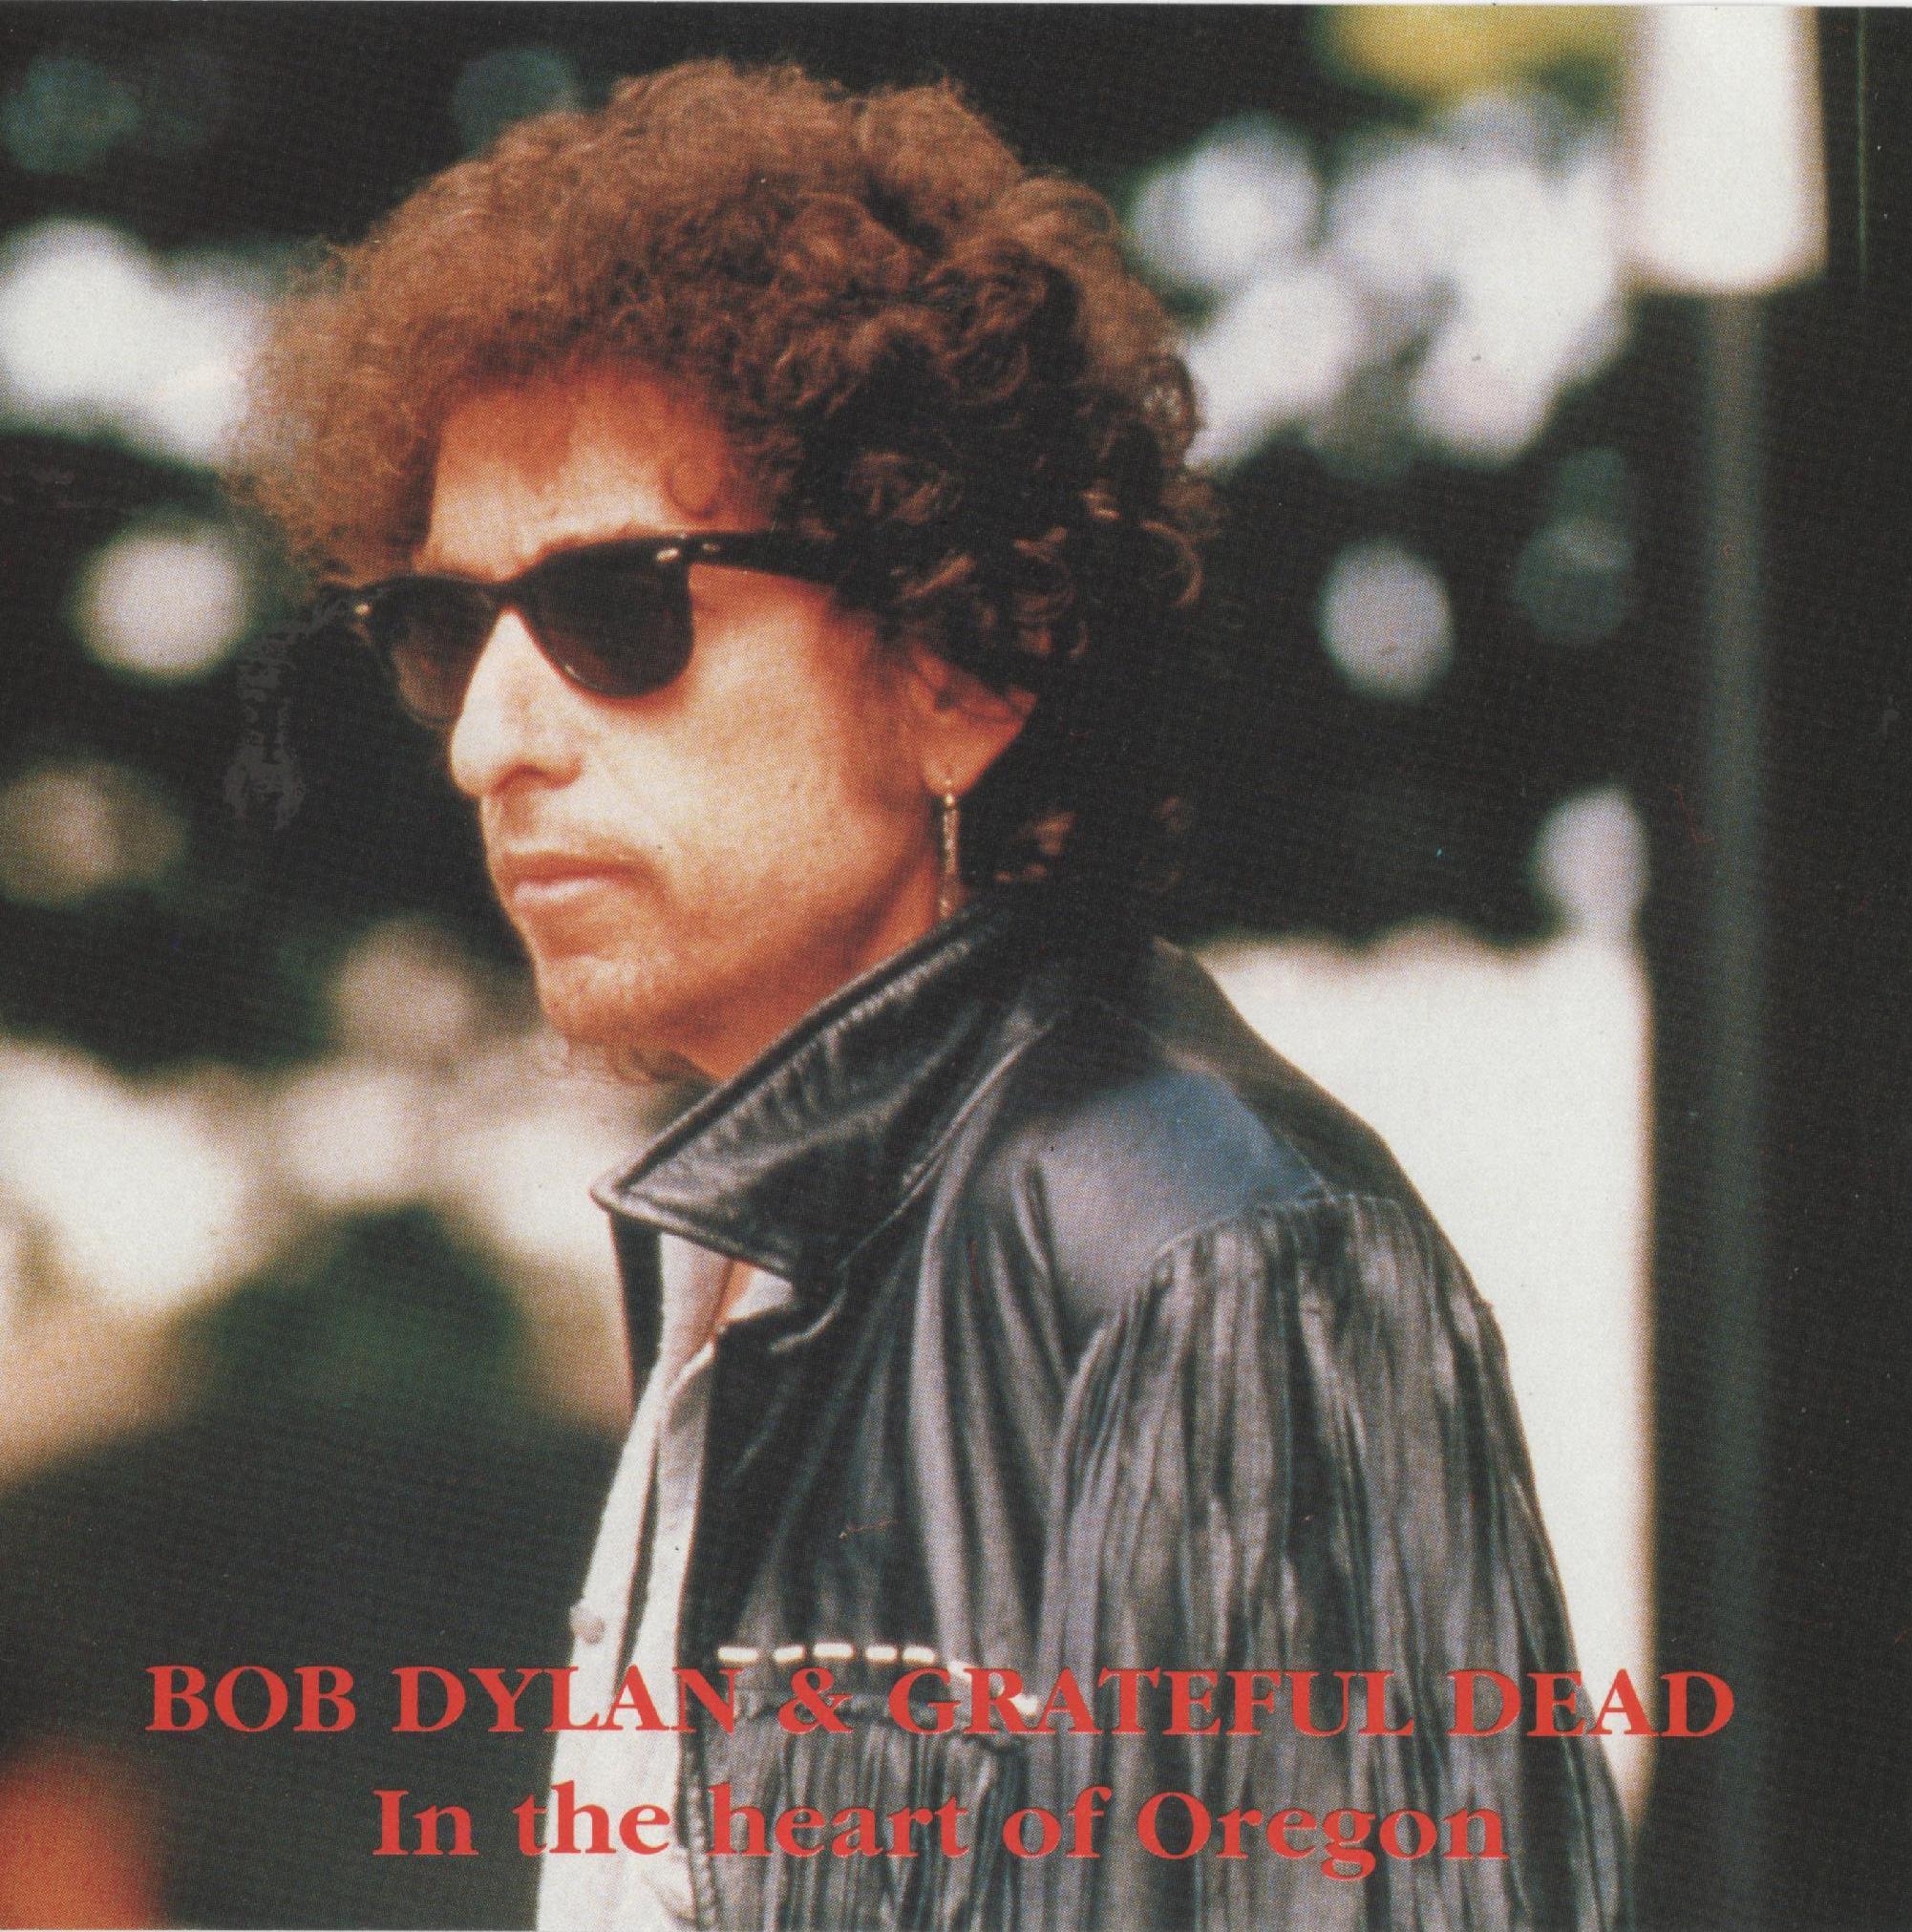 Dylan & The Dead 1987-07-19 In the Heart of Oregon (Flamingo Records)